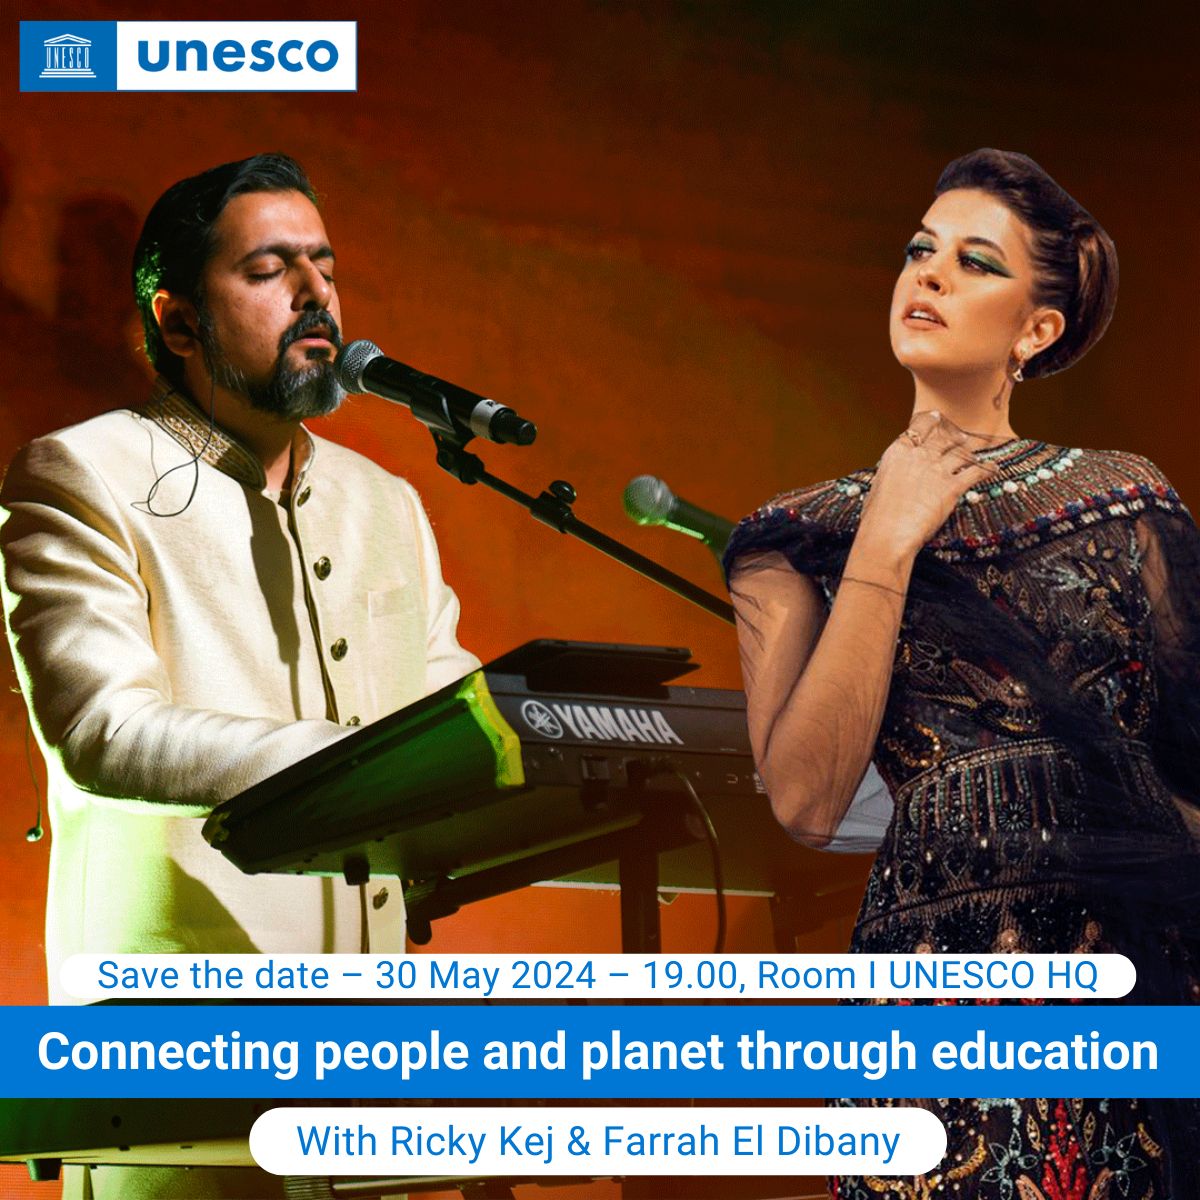 Ahead of this year's #WorldEnvironmentDay, don't miss @UNESCO's event - 'Connecting people and planet through education' - with artists @RickyKej and Farrah El Dibany on 30 May from 19:00-20:45 pm CET. Find out more and register online: unesco.org/en/articles/co… #LearnForOurPlanet